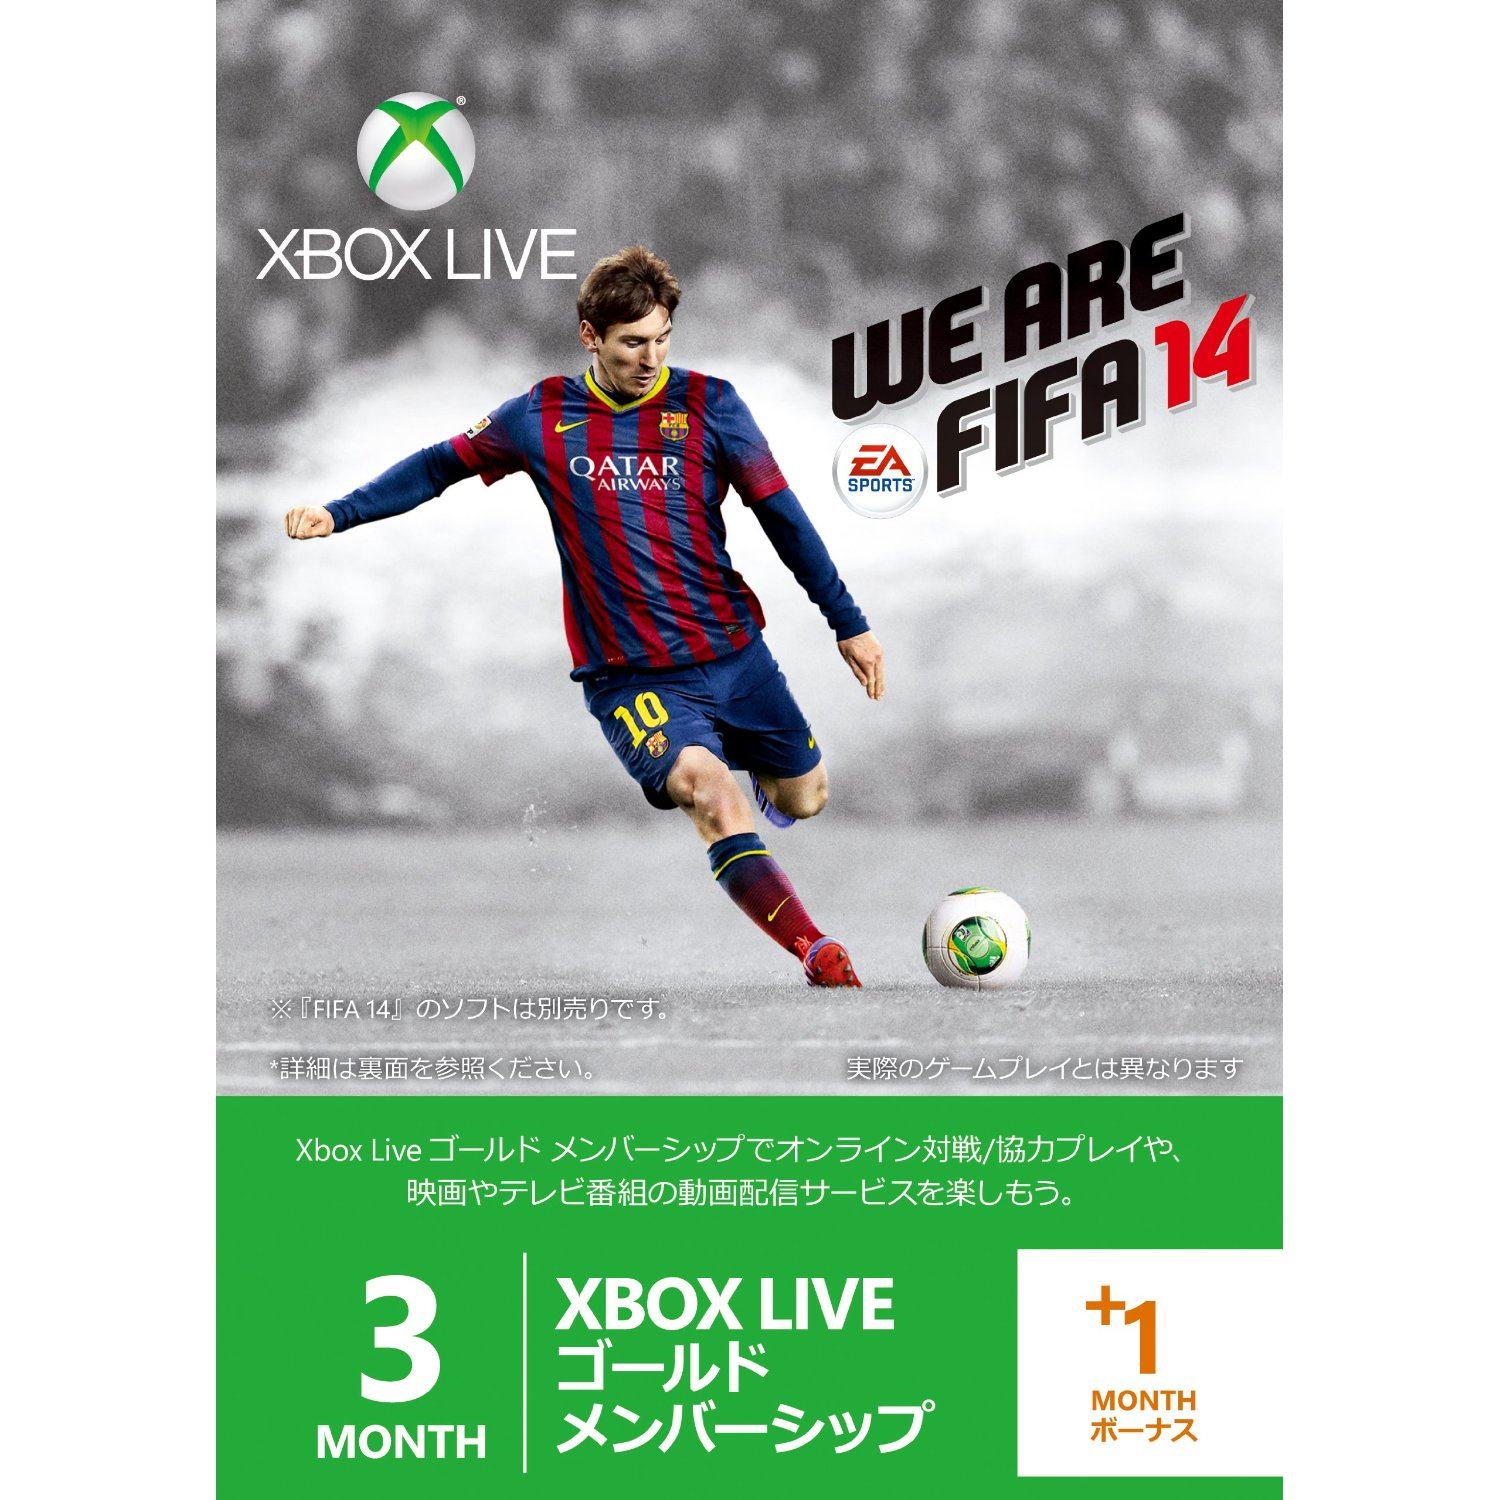 Xbox Live 3 Month 1 Gold Membership Card Fifa 14 Edition